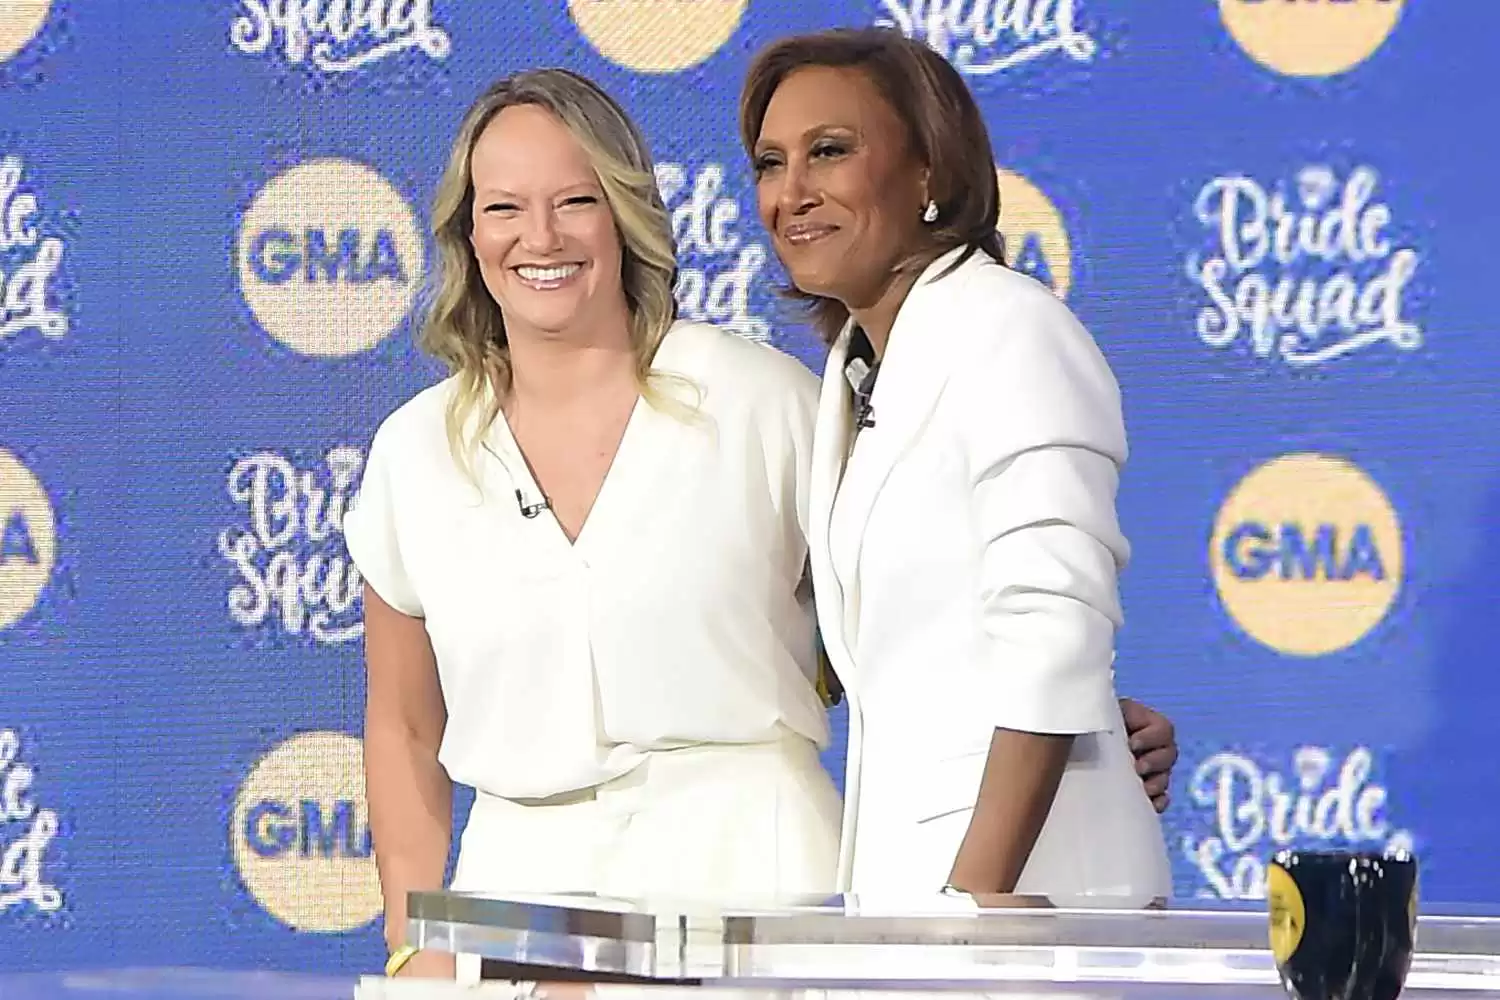 'GMA' Hosts Beach-Themed Bachelorette Party for Robin Roberts and Her Fiancée Amber Laign